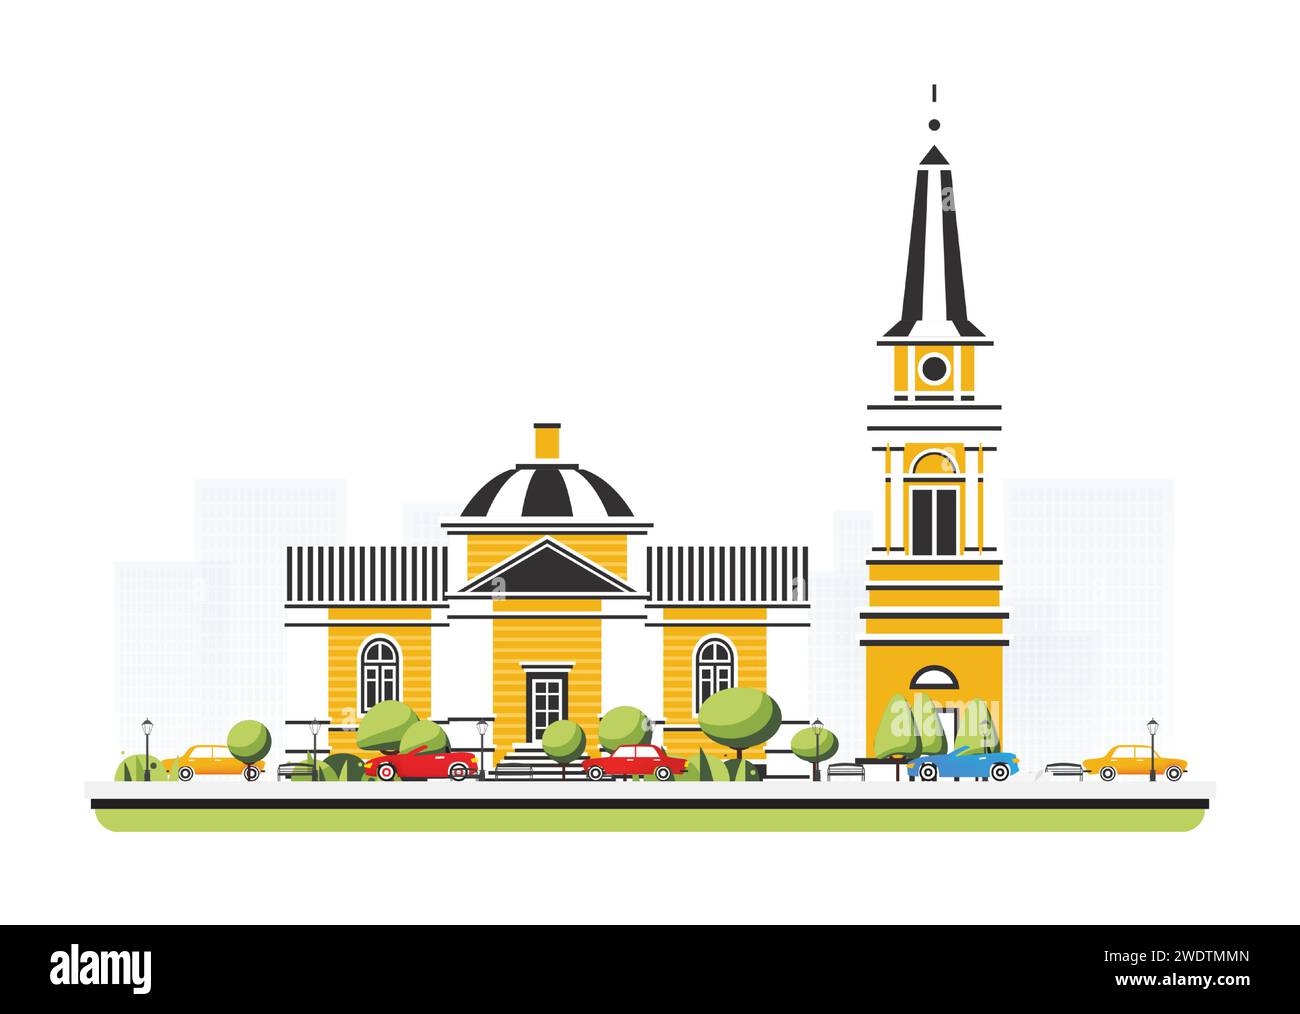 Old church building in flat style with trees and cars. Vector illustration. City scene isolated on white background. Urban architecture. Stock Vector